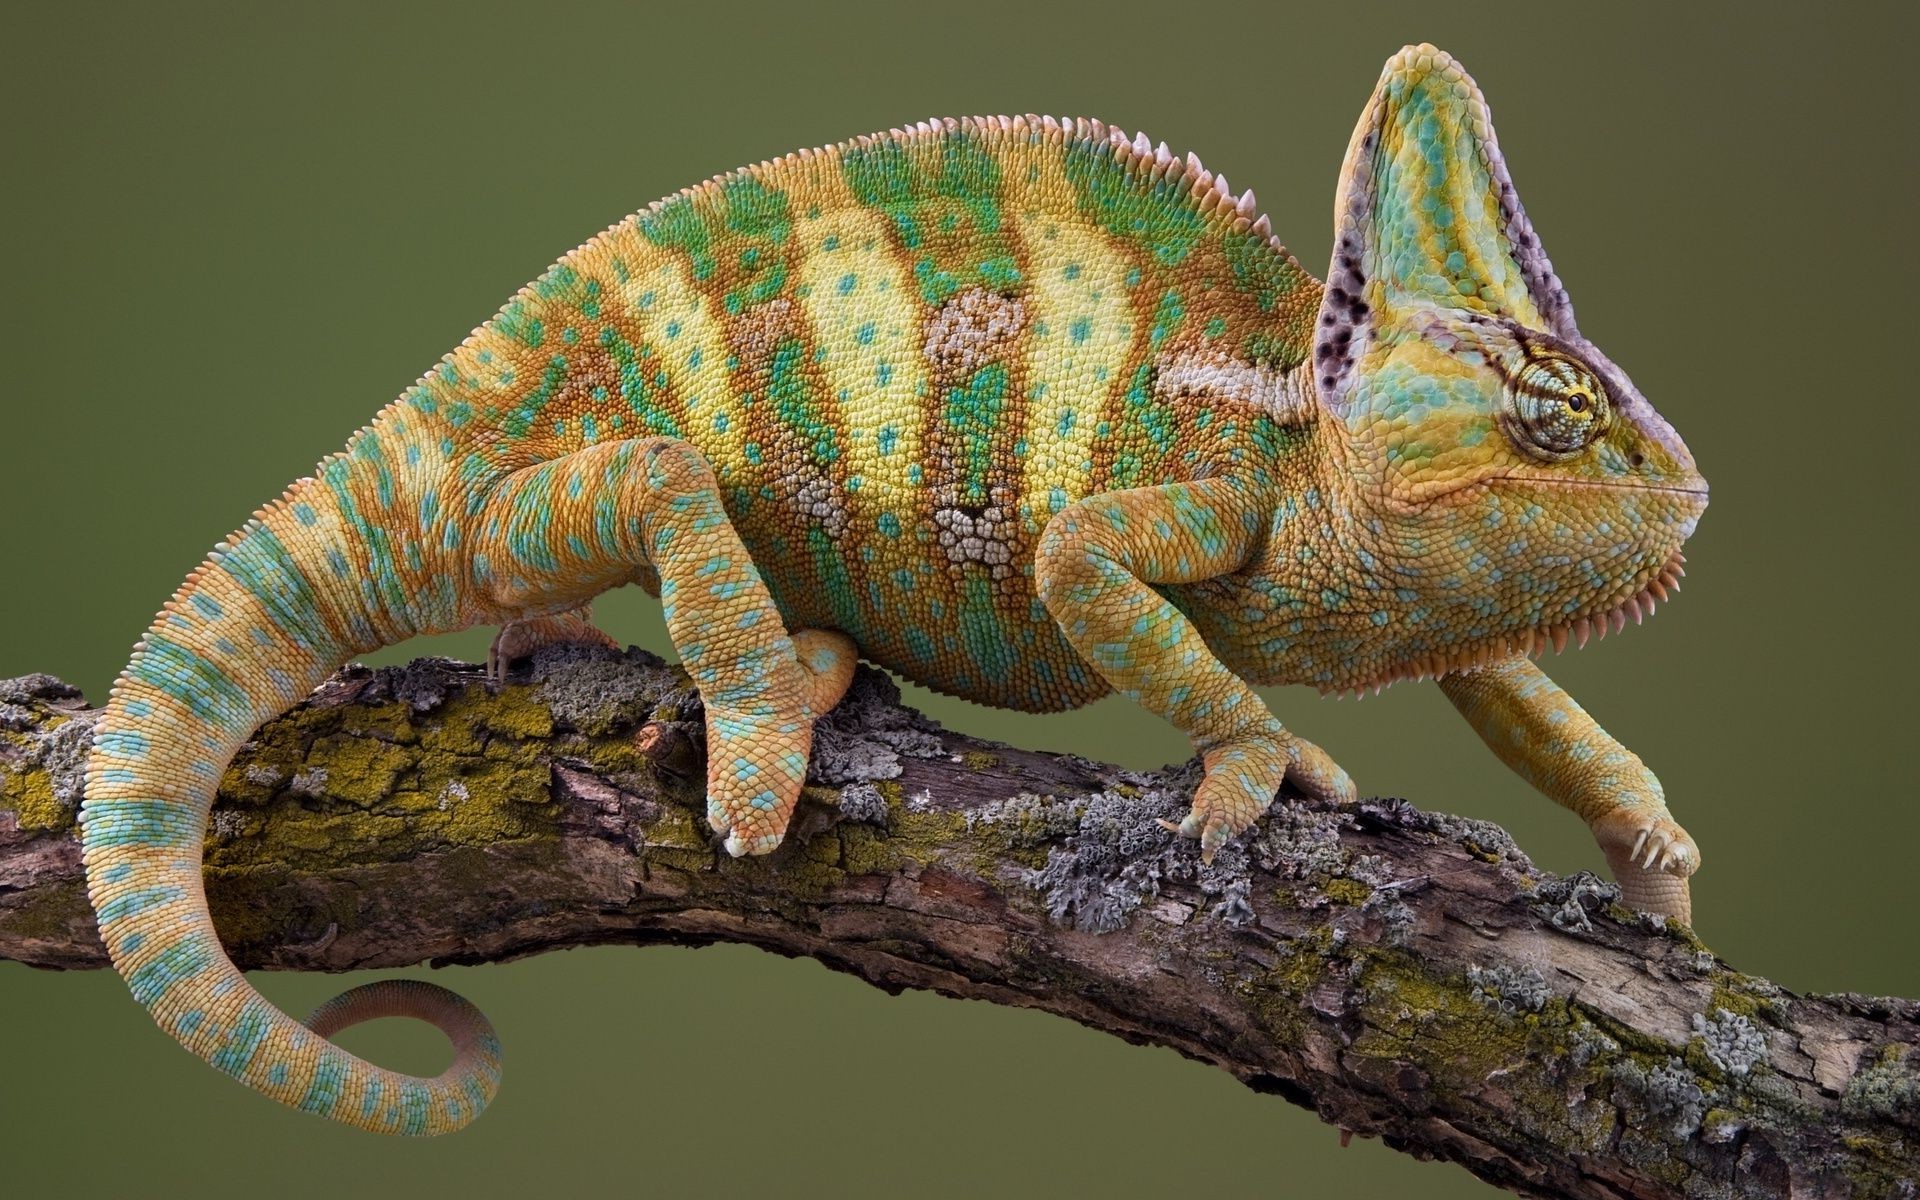 reptiles and frogs lizard reptile wildlife chameleon animal nature dragon zoo tree wild color pet one vertebrate scale